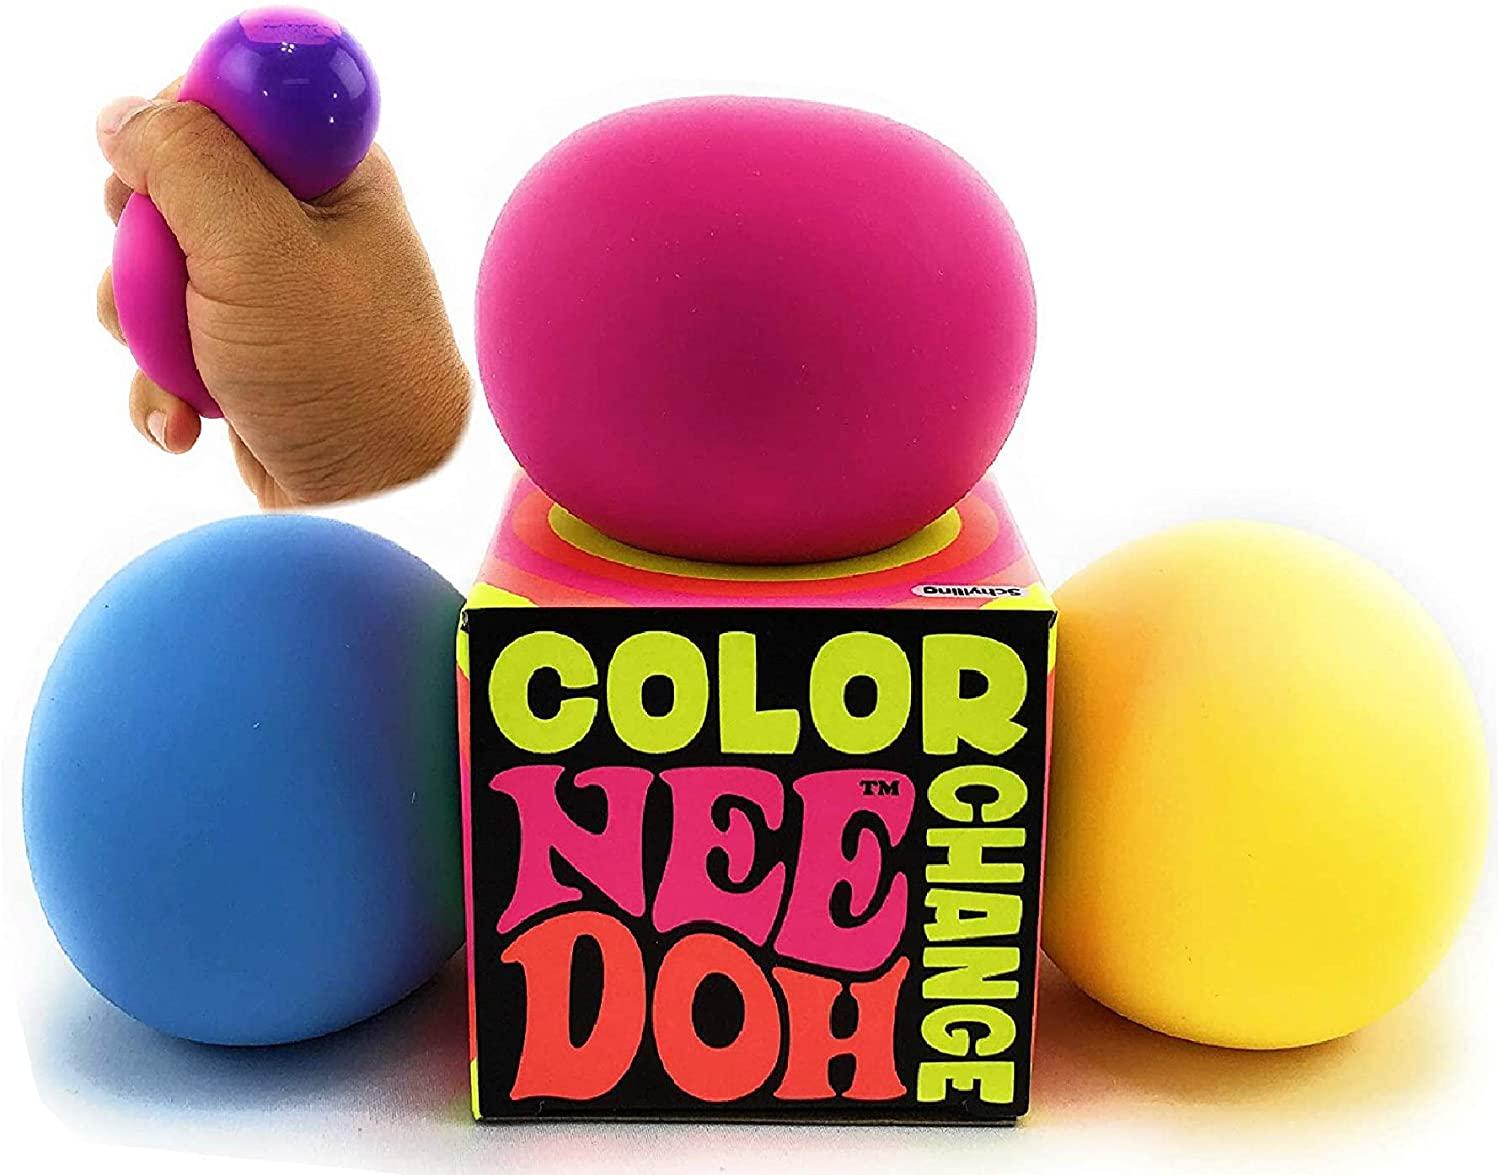  Color Changing Nee Doh (Ccsq)- Stress Ball